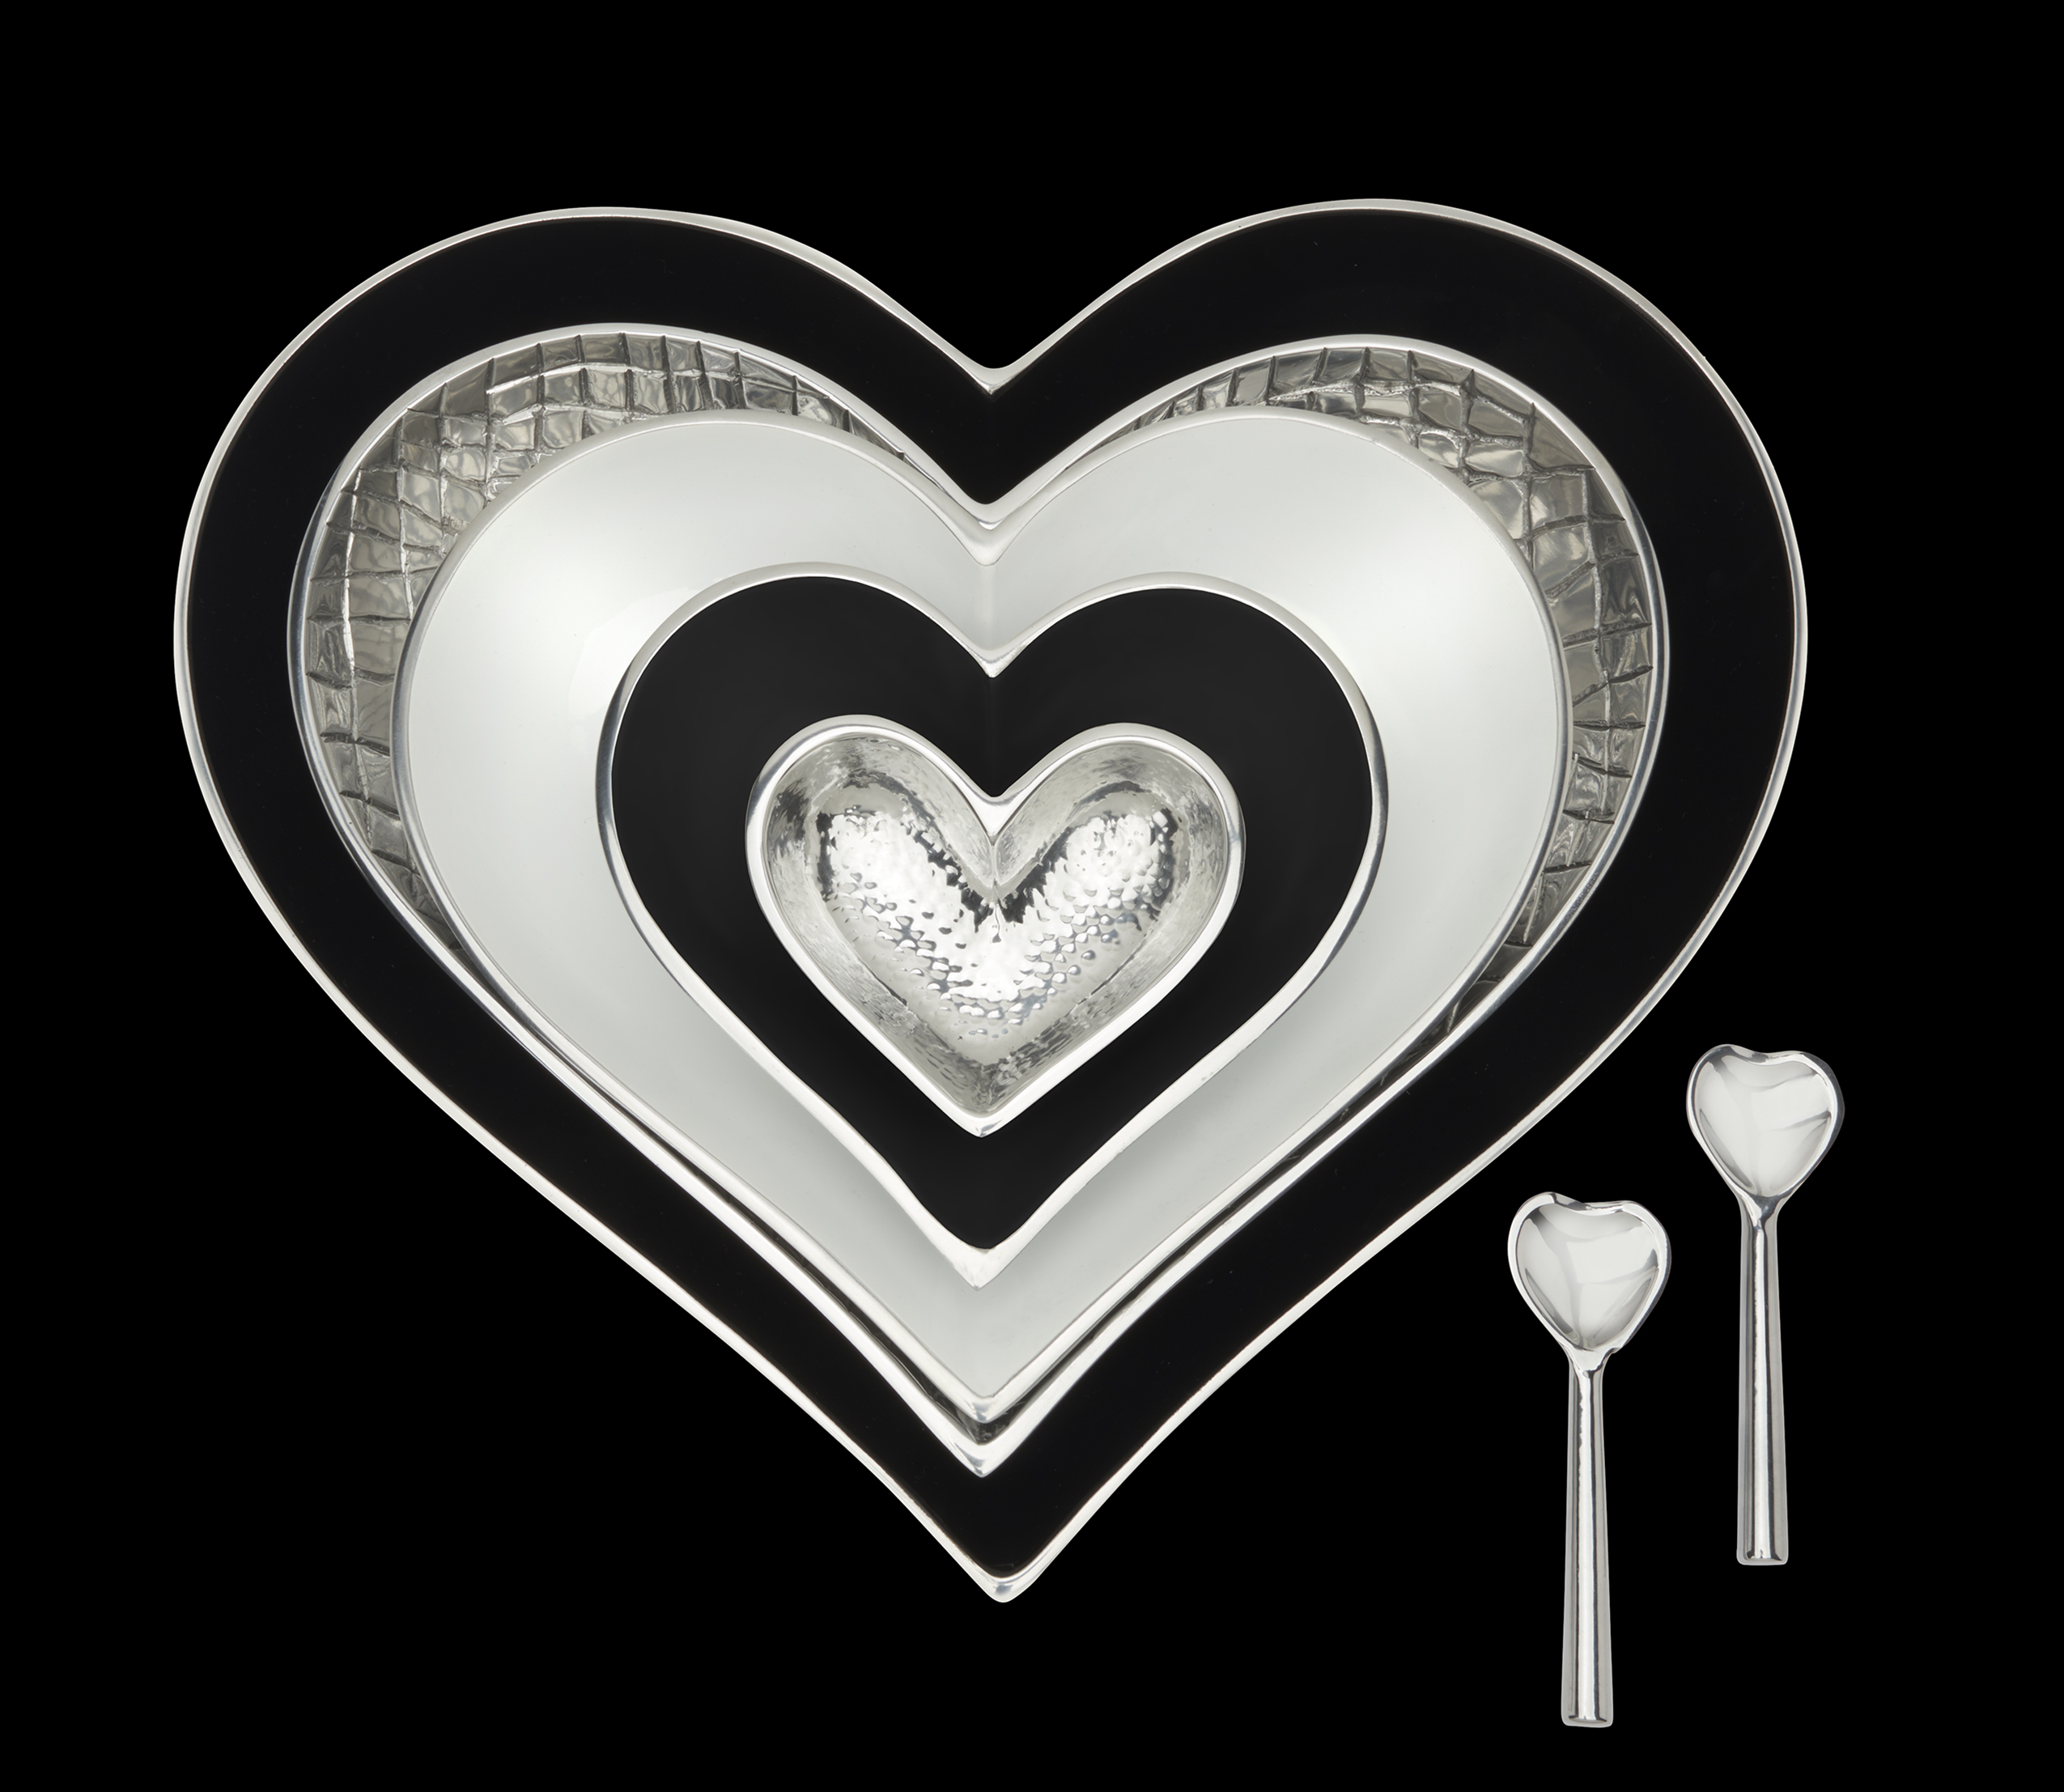 5 Hearts Set with 2 Heart Spoons-Black & White